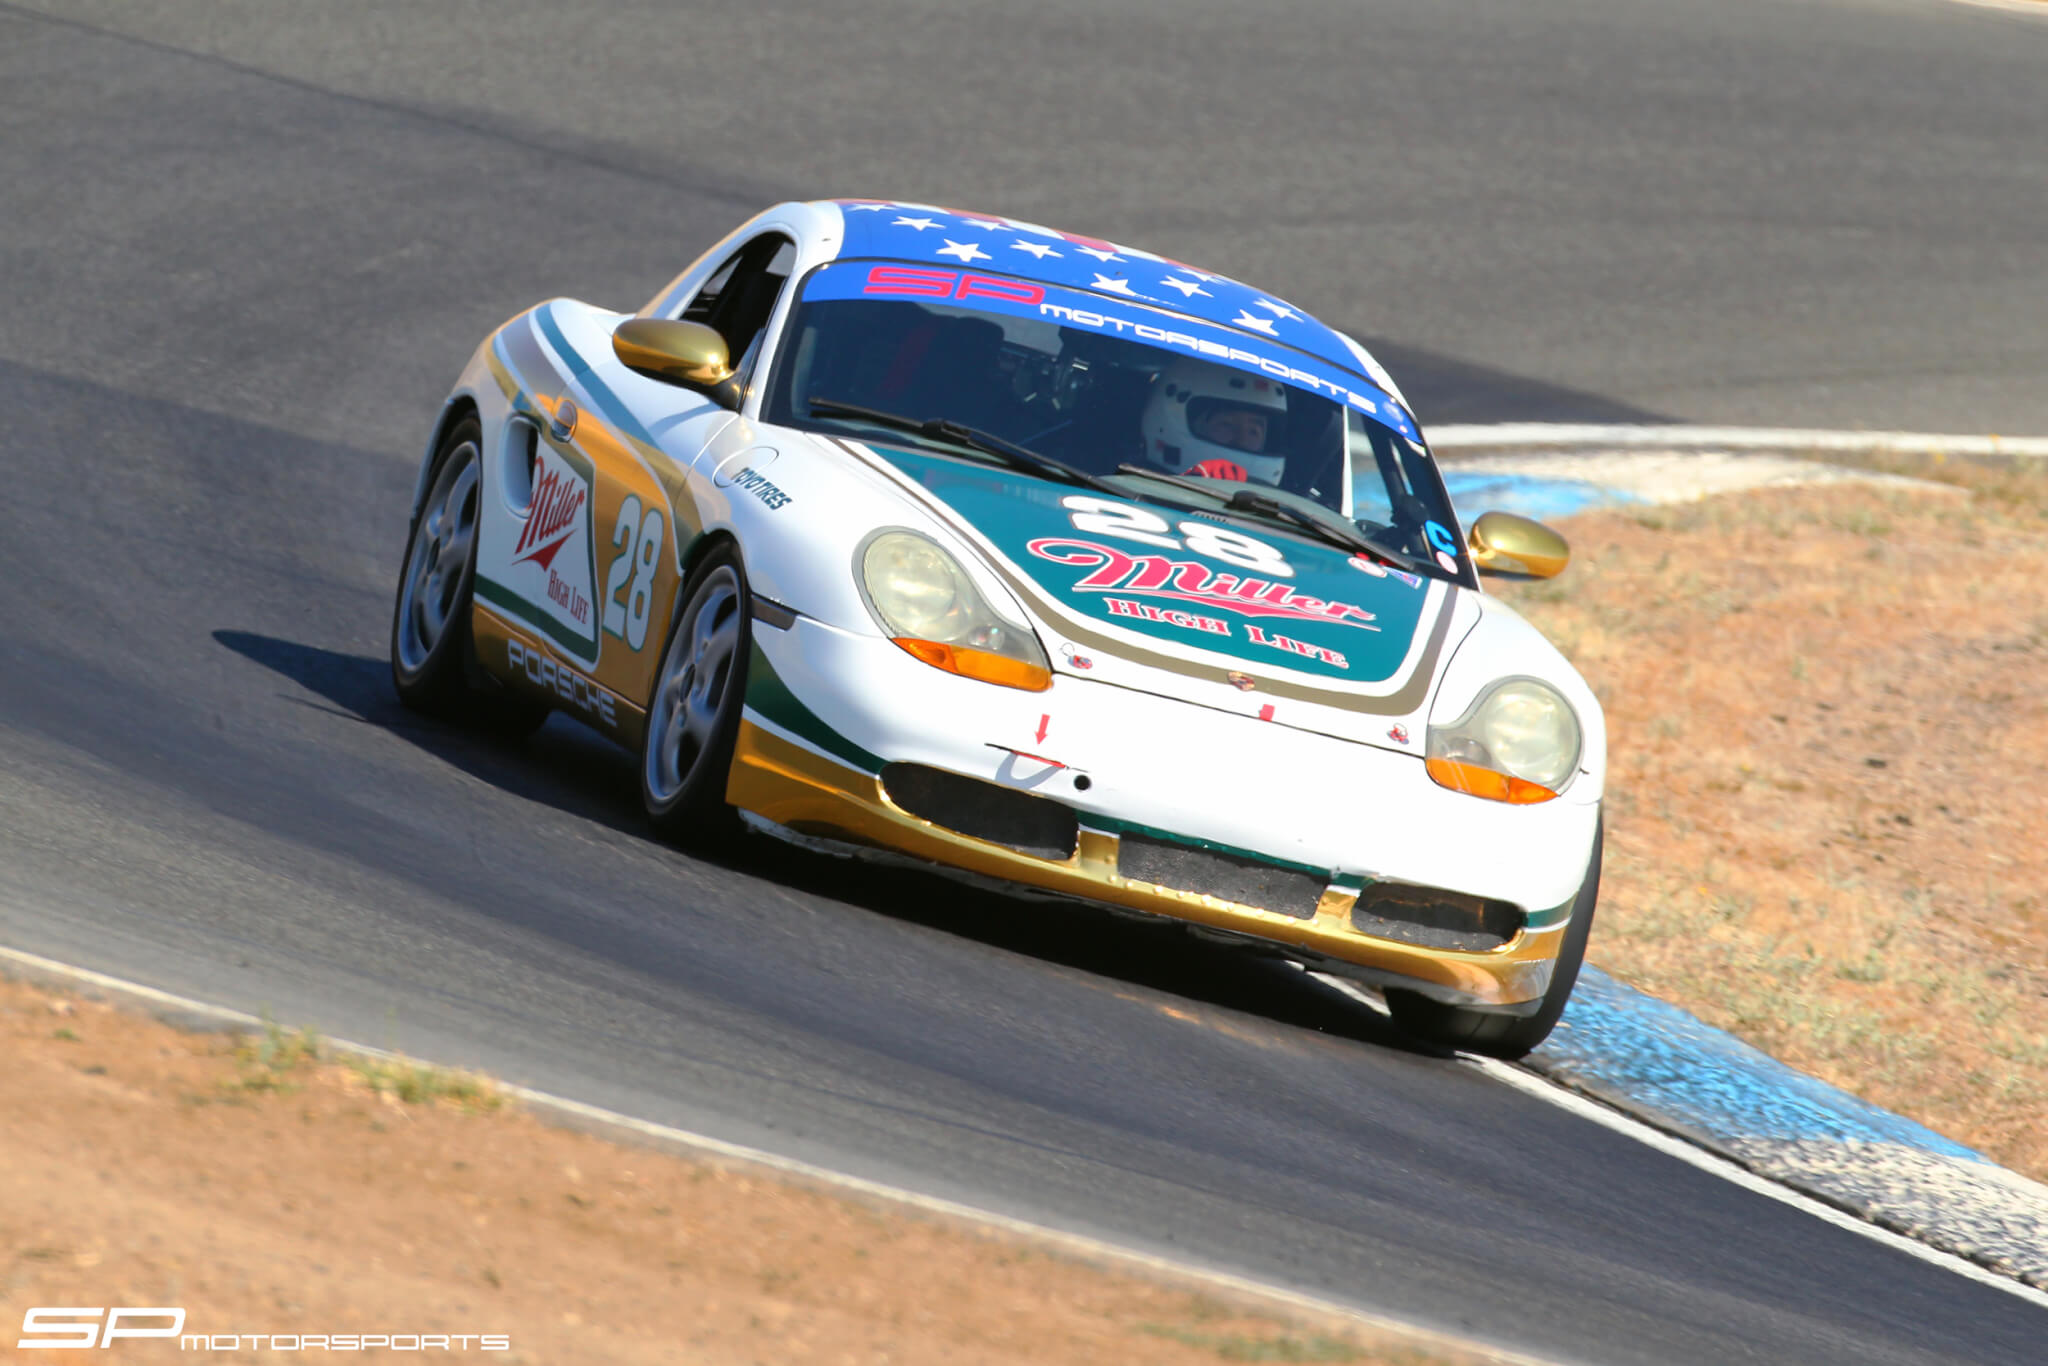 SP Motorsports Arrive and Drive Spec Boxster at Thunderhill